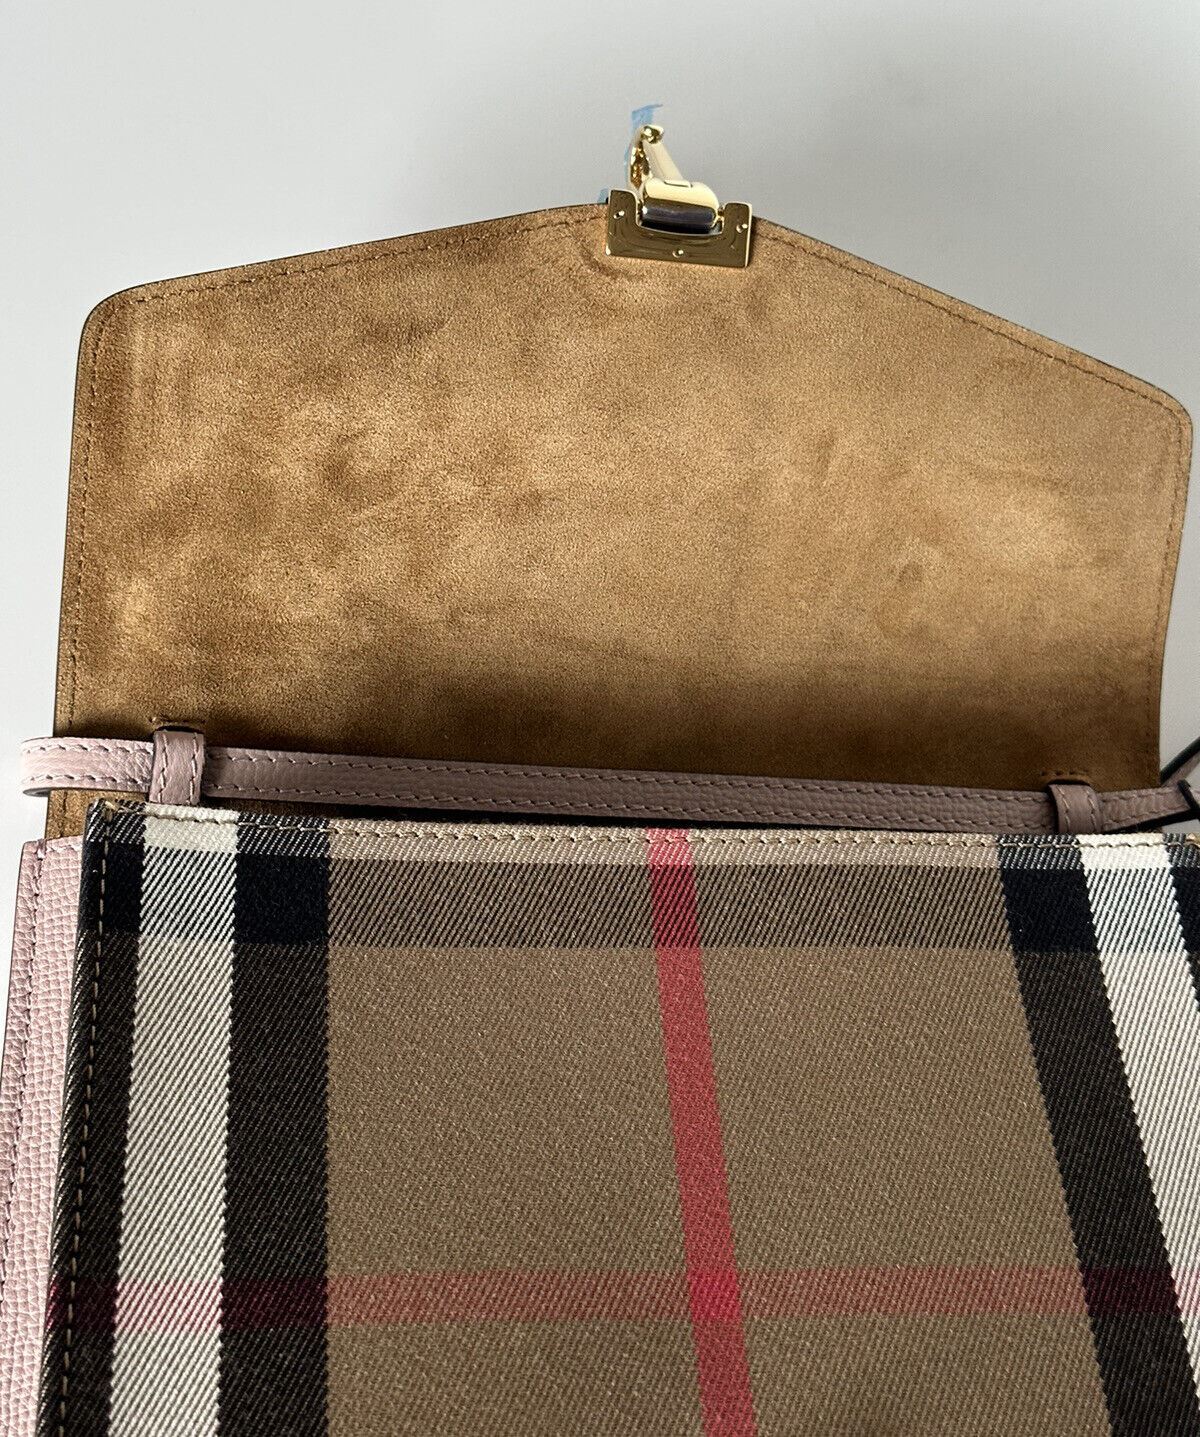 Burberry Stone/Pale Orchid Horseferry Check Canvas and Leather